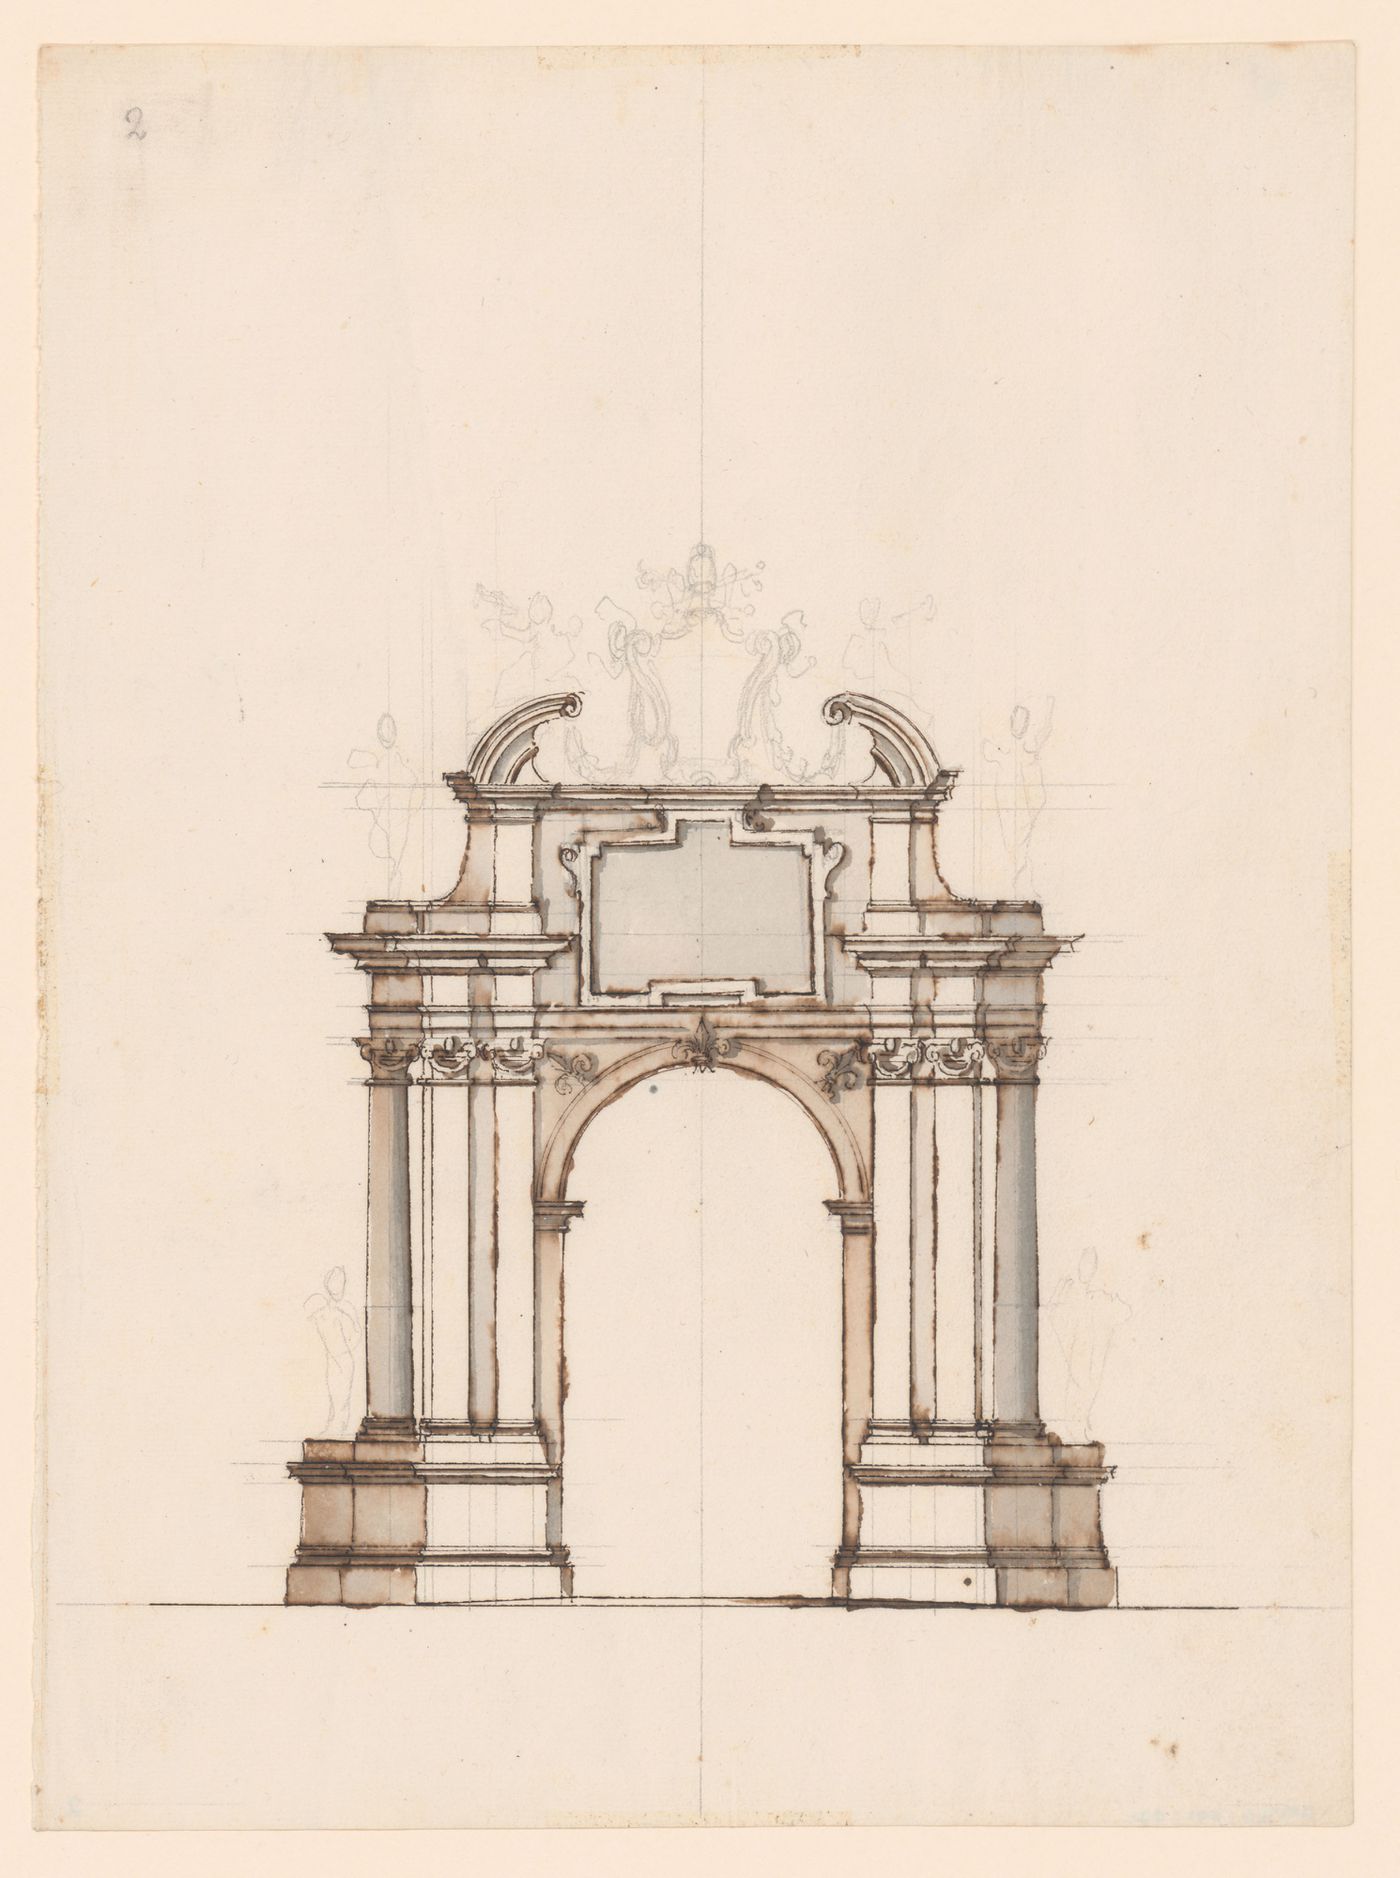 Incomplete elevation for a triumphal arch for the possesso of Innocent XIII, Rome